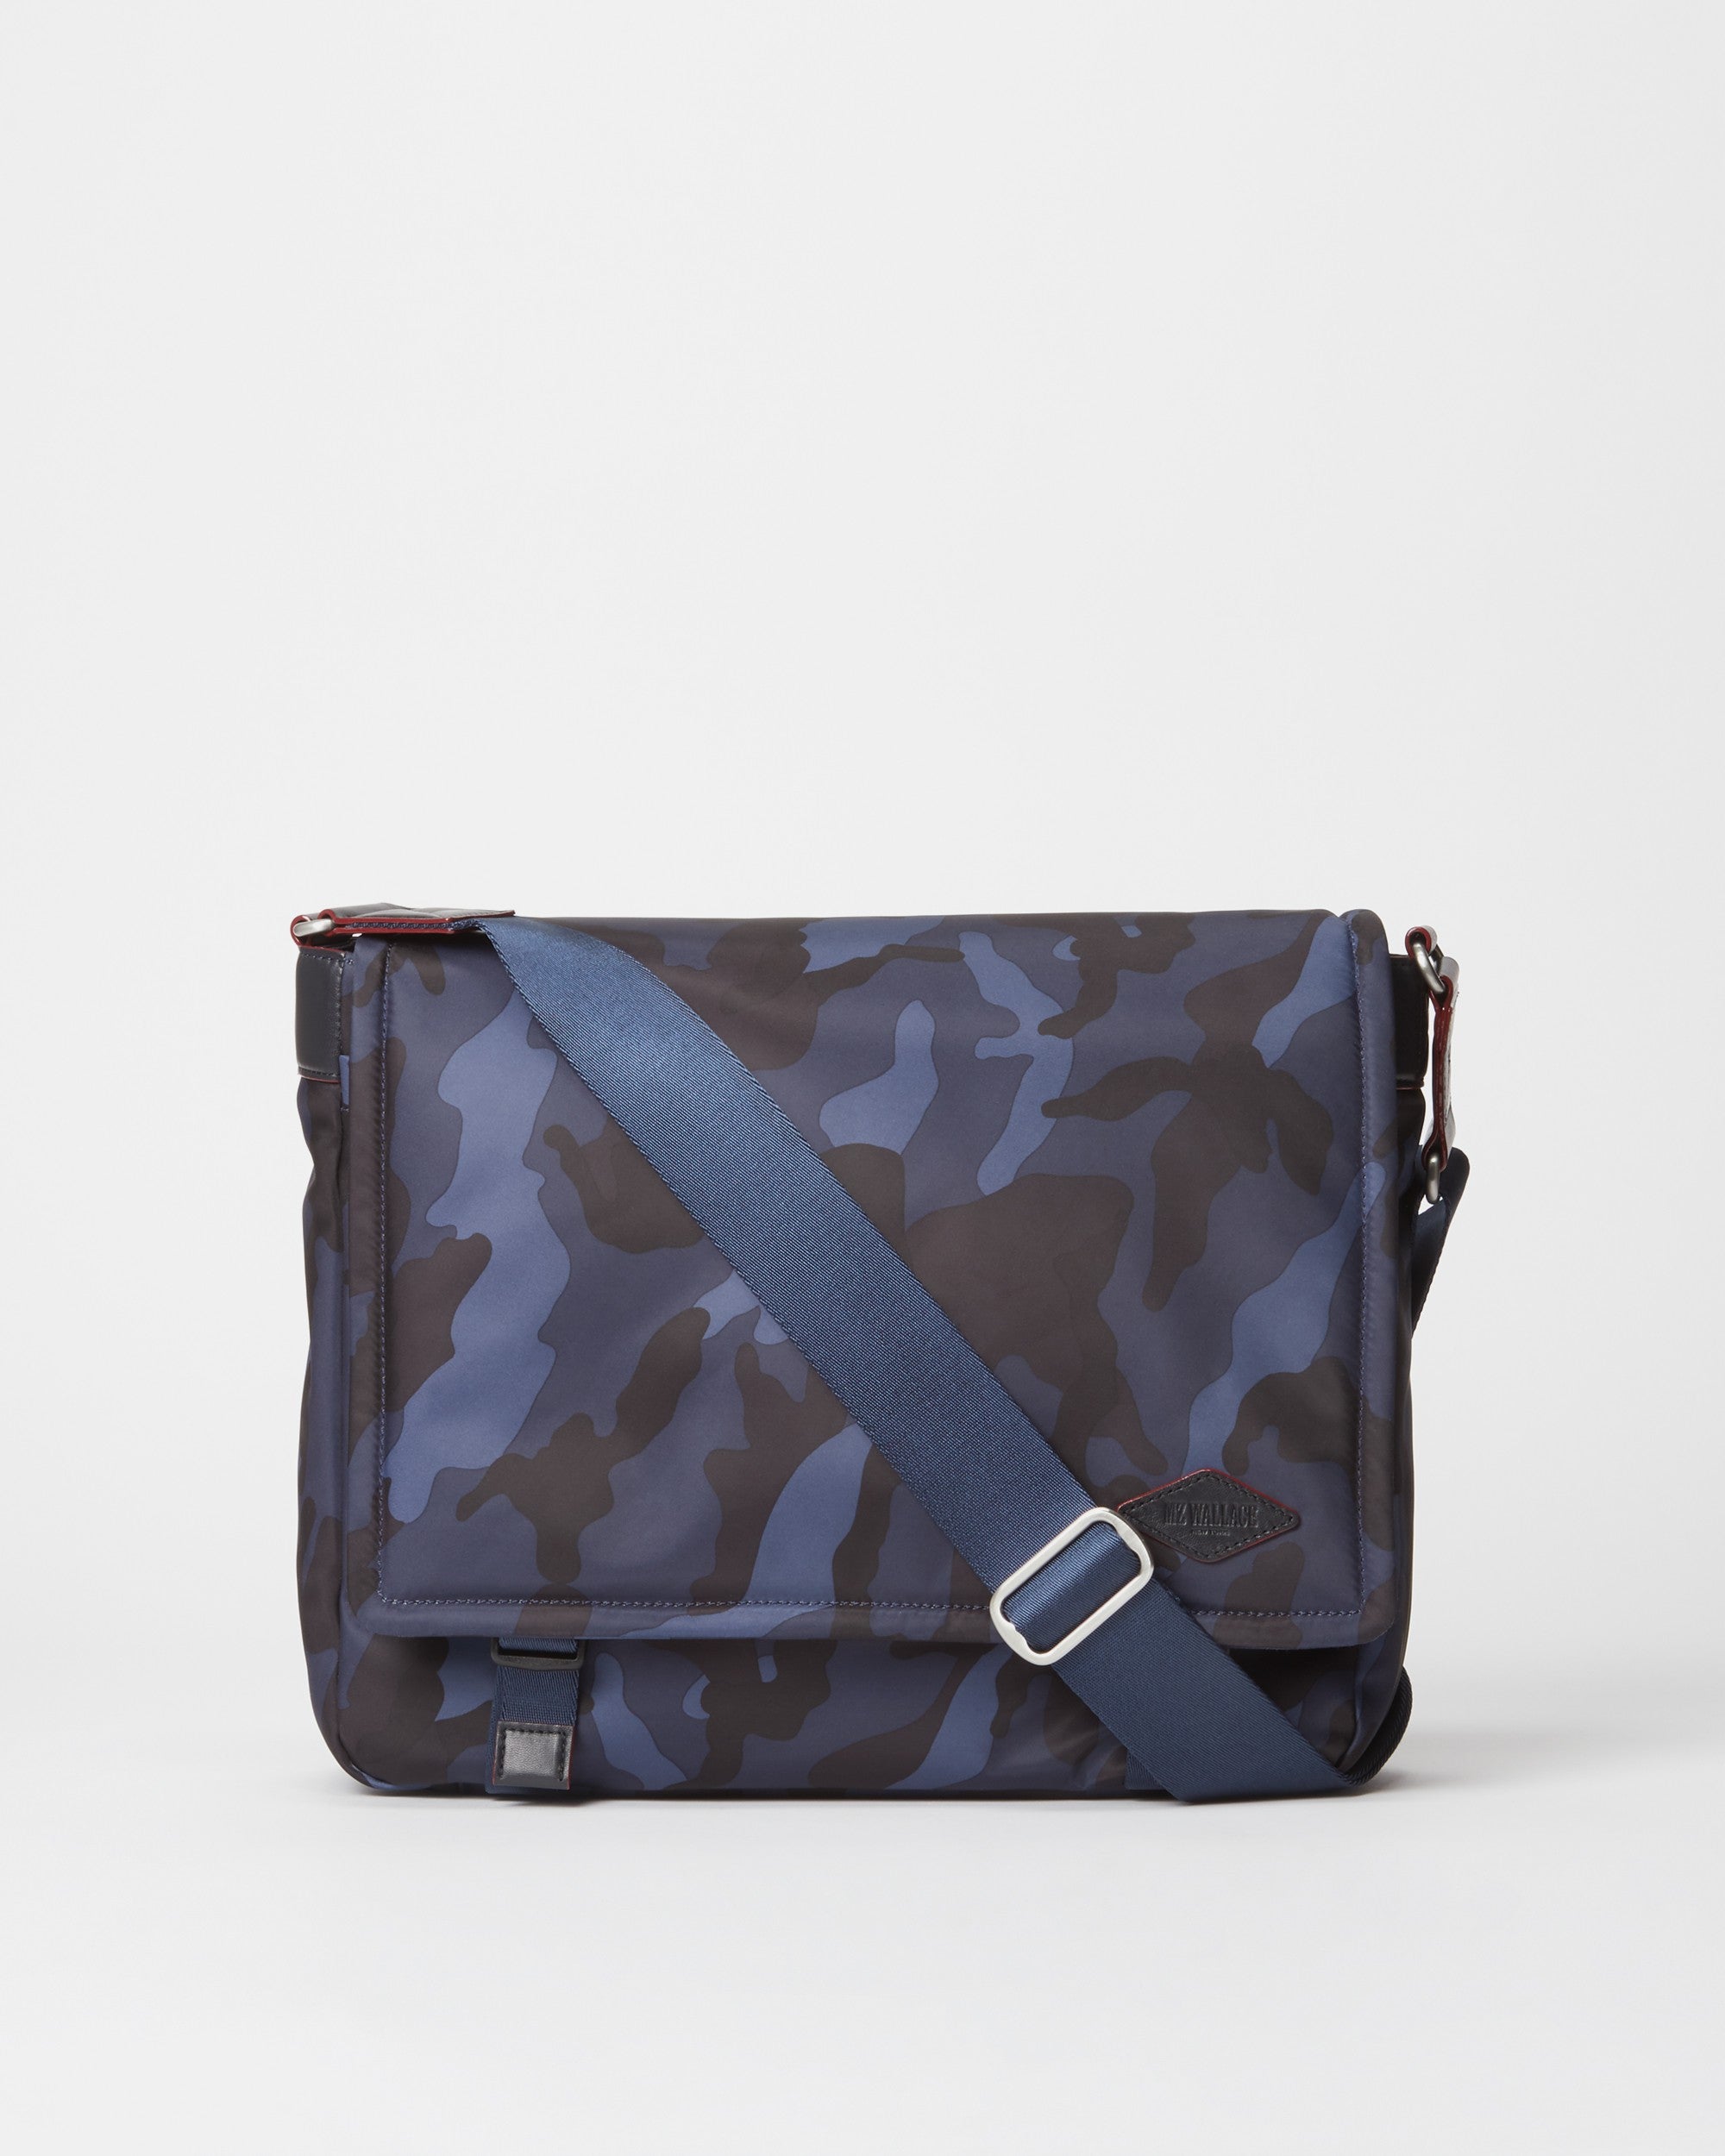 Is this blue sling bag really that new and hard to get ? I don't